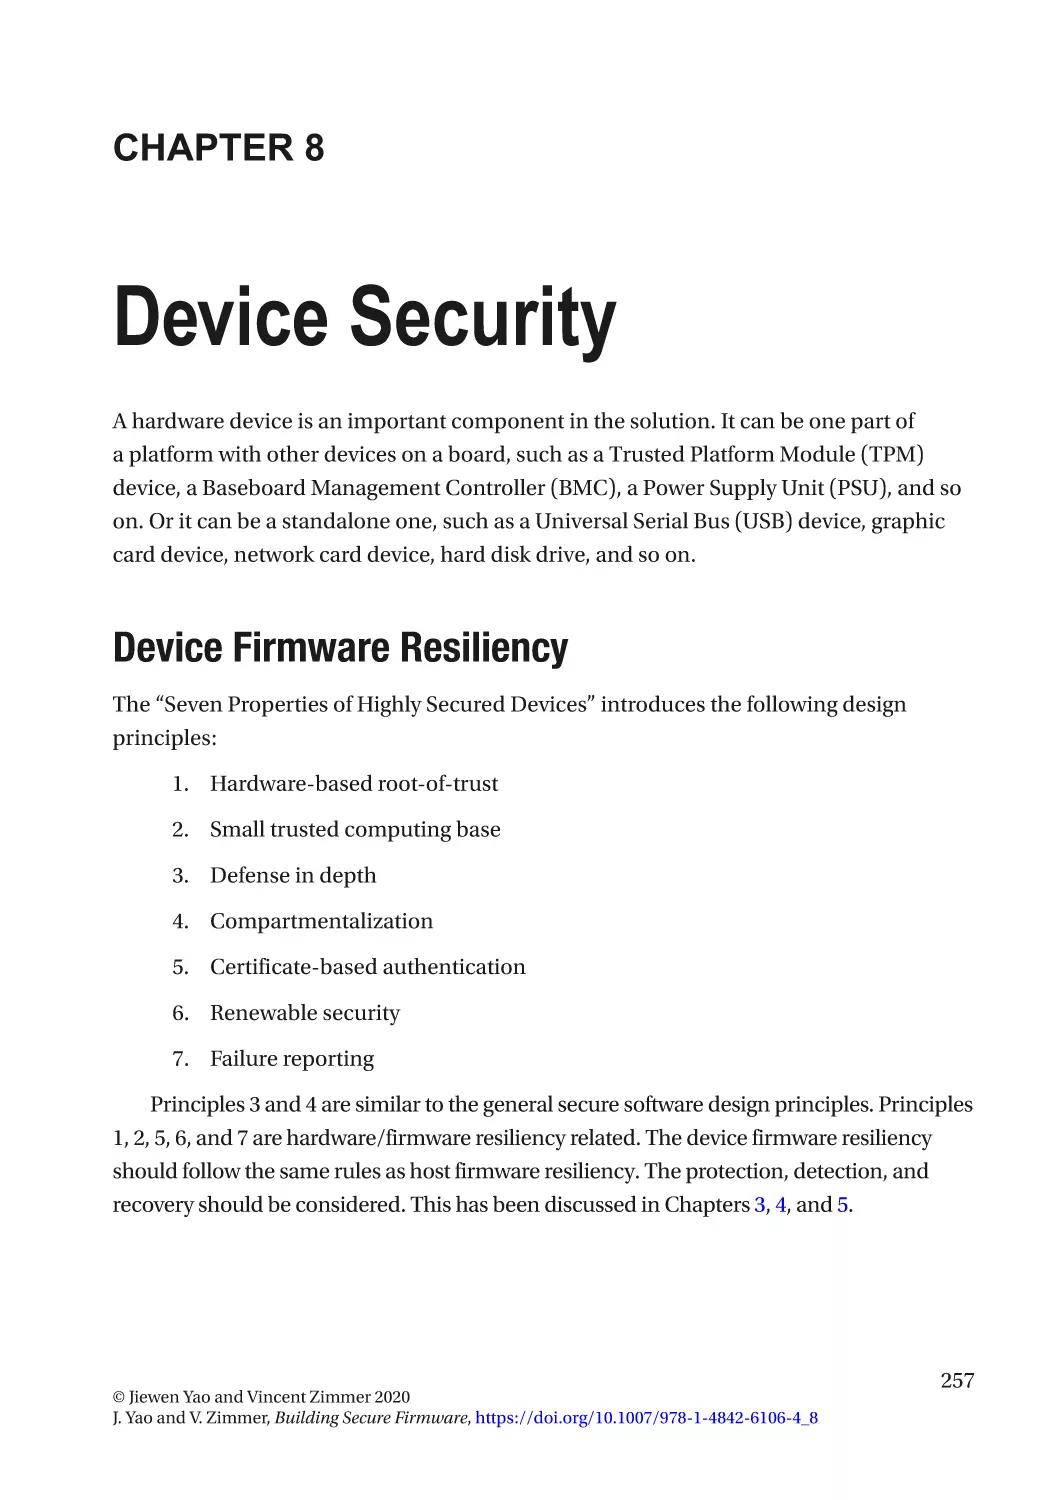 Chapter 8
Device Firmware Resiliency